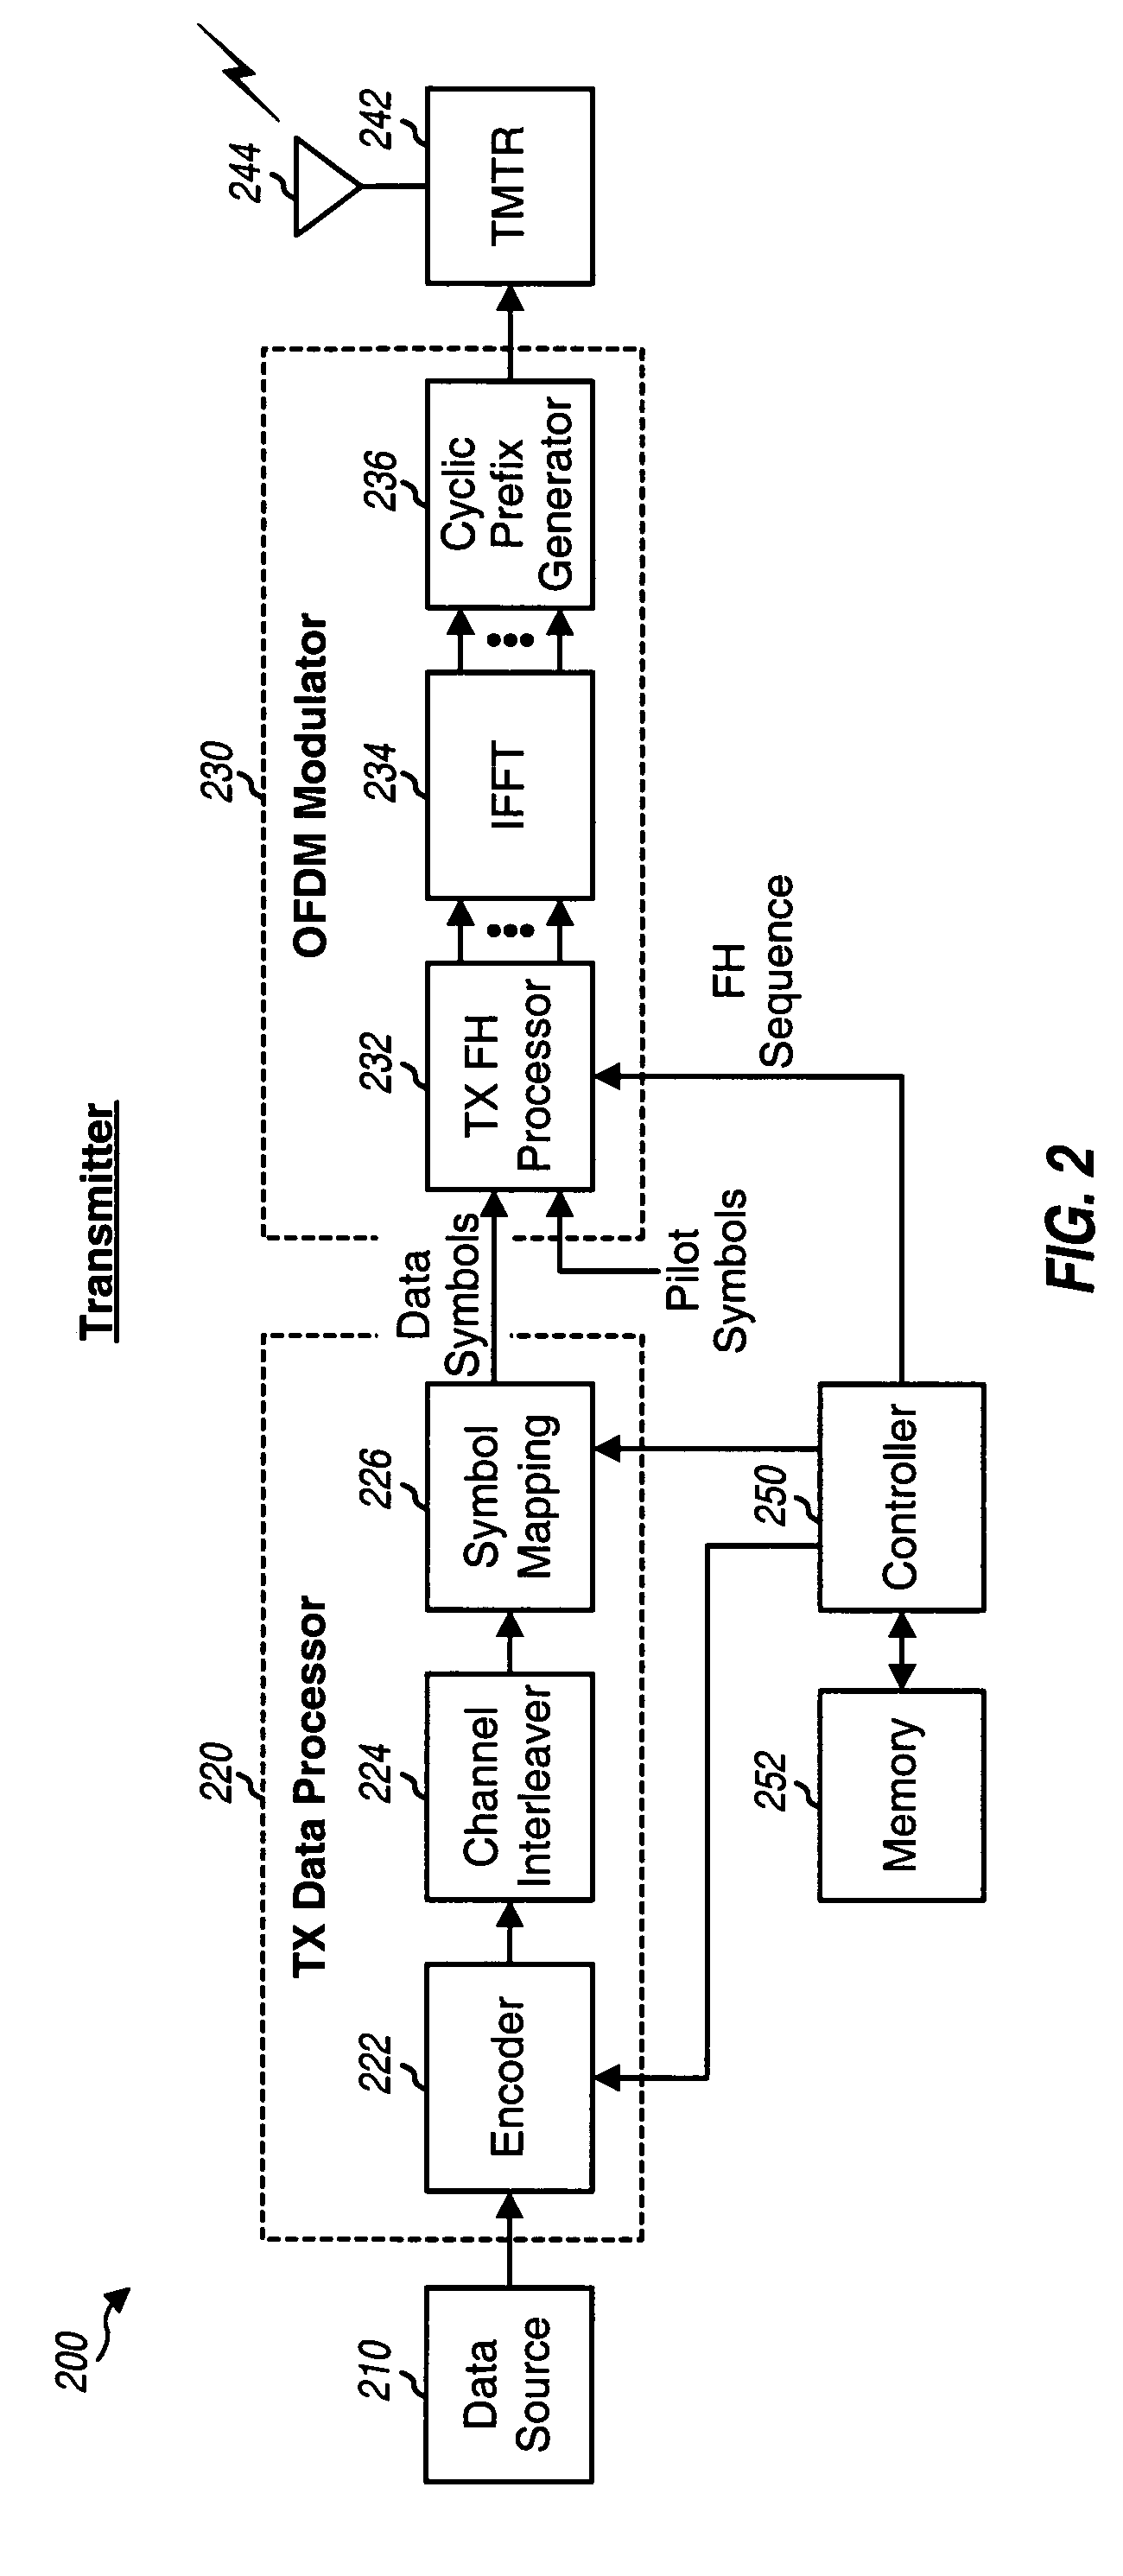 Iterative channel and interference estimation and decoding